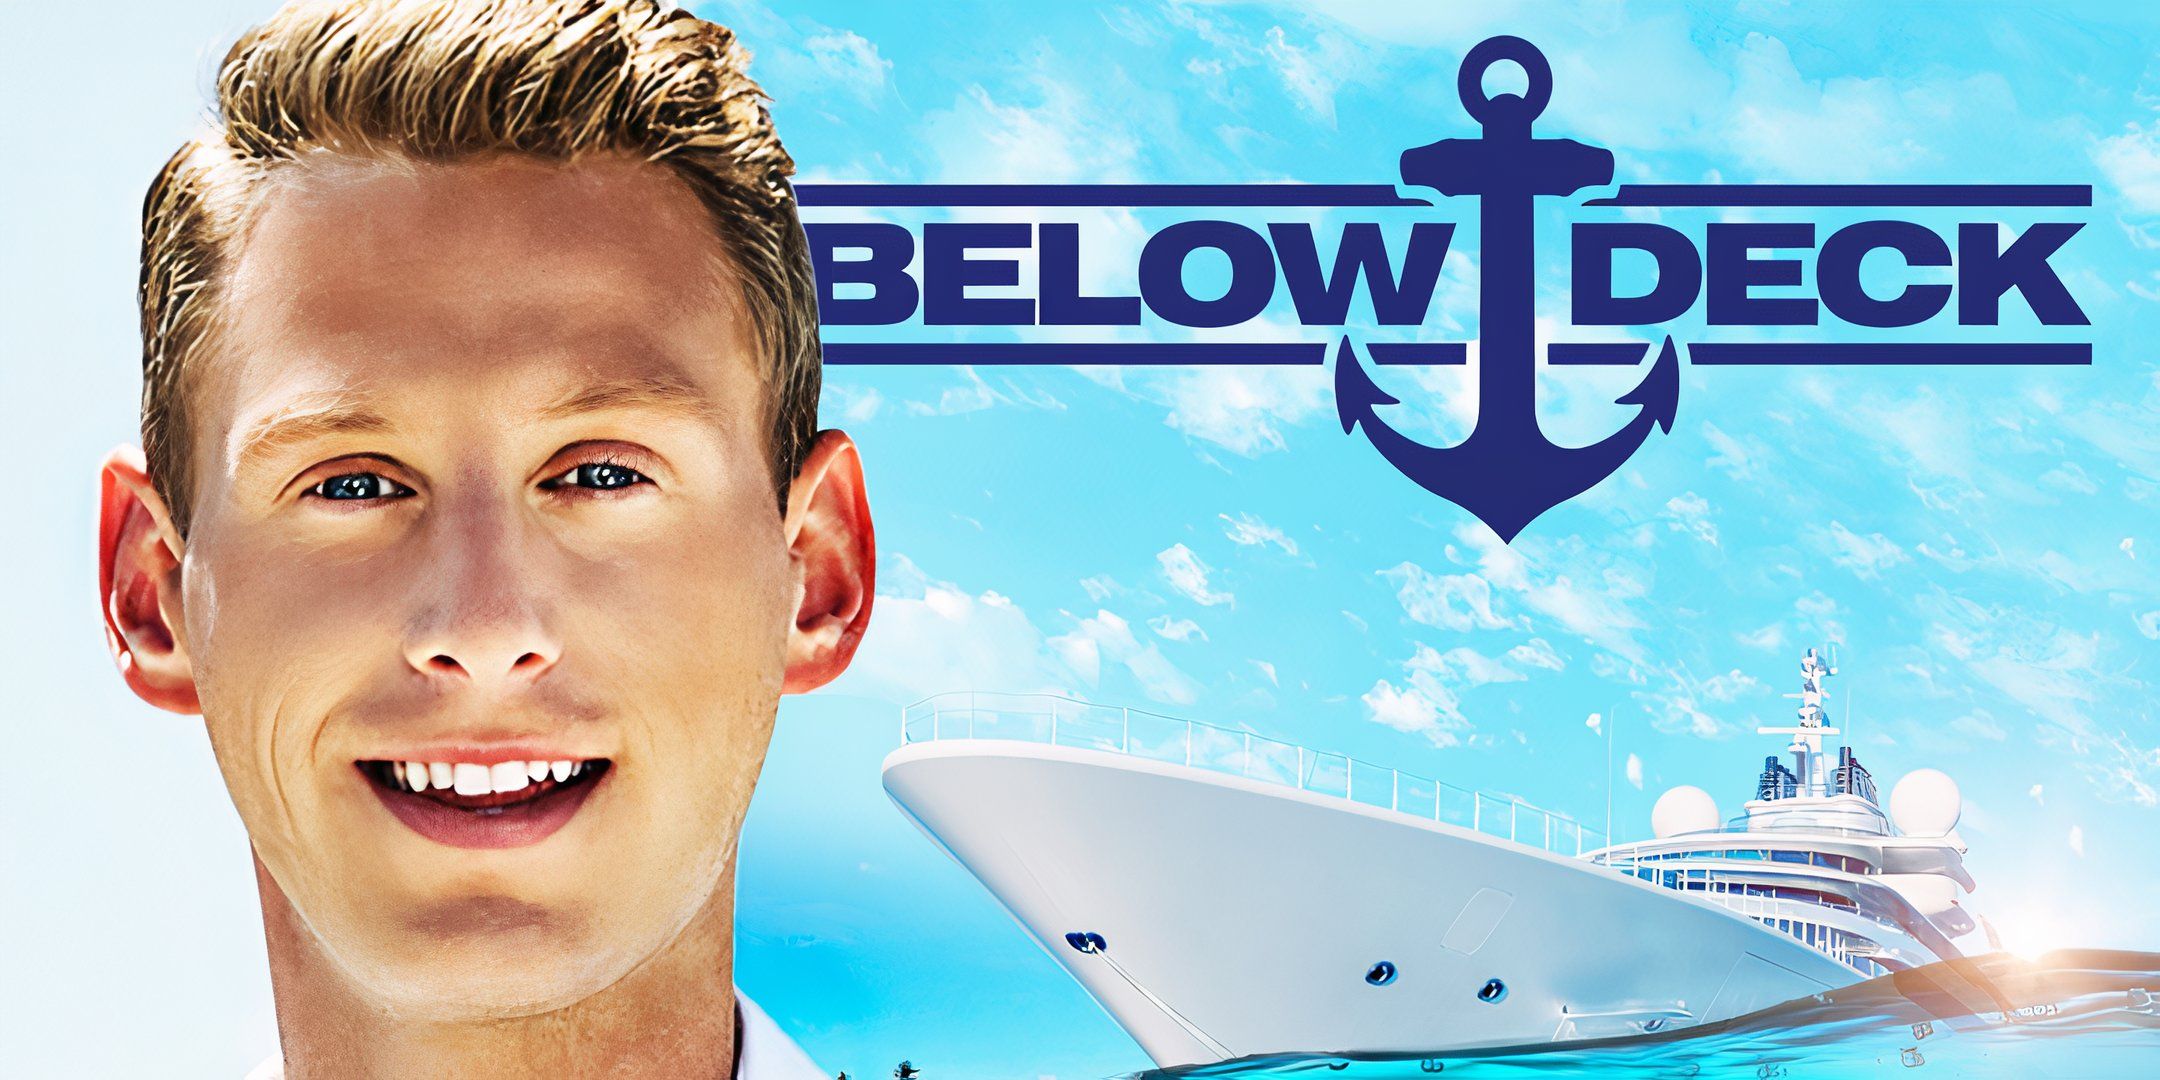 What Really Happened To Fraser Olender From 'Below Deck' Season 11?